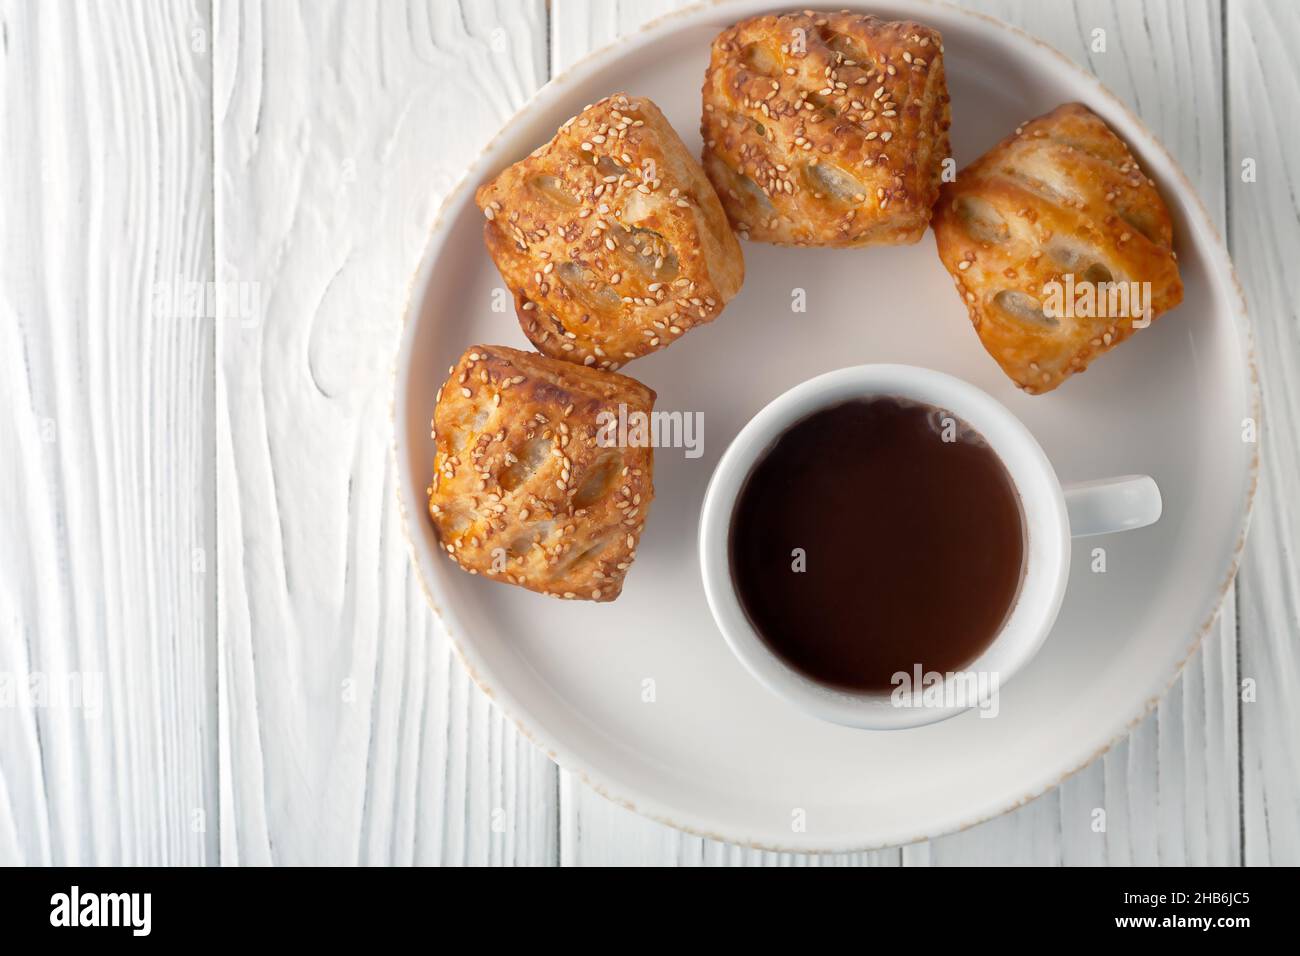 On a white wooden table there is a mug with hot chocolate and fresh aromatic puffs. Stock Photo